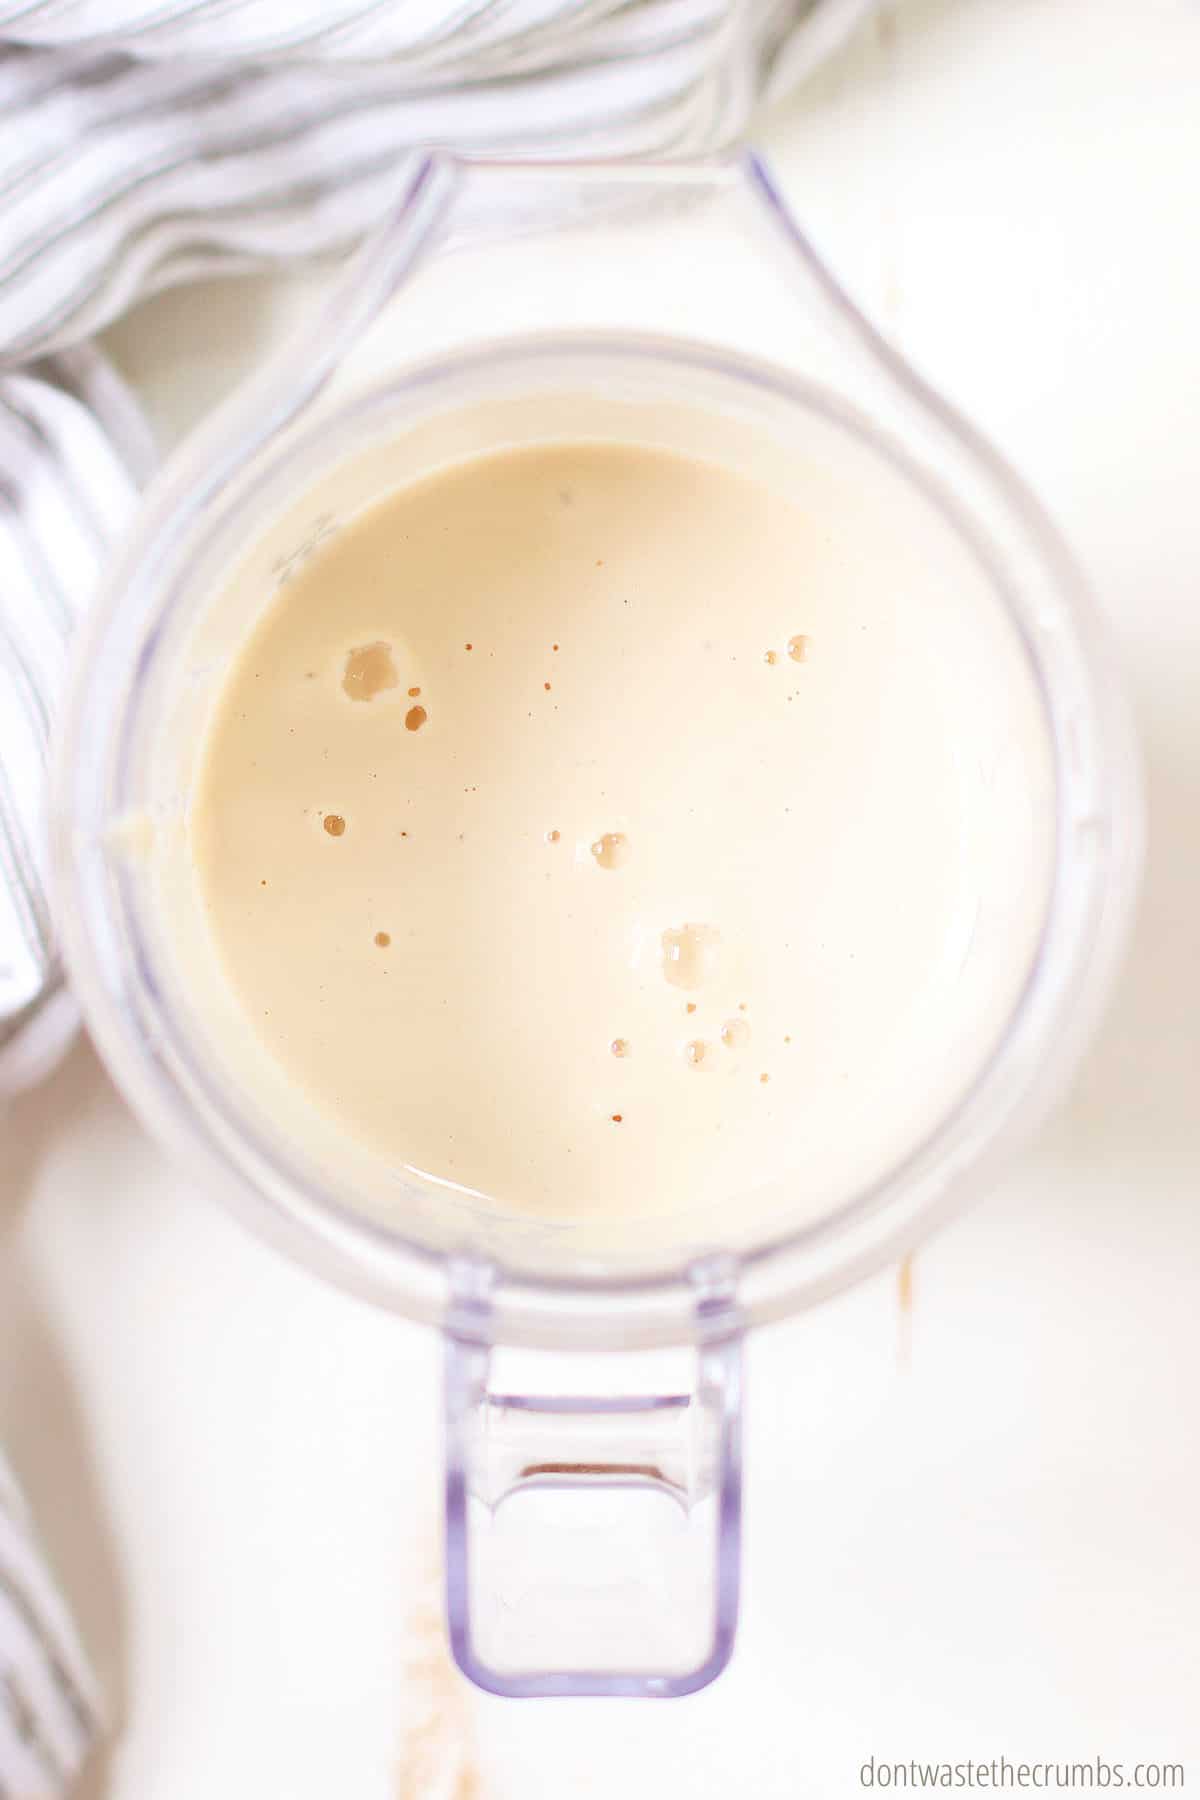 Making peanut milk is super easy! Just blend your soaked peanuts and filtered water in a blender until it becomes milk!